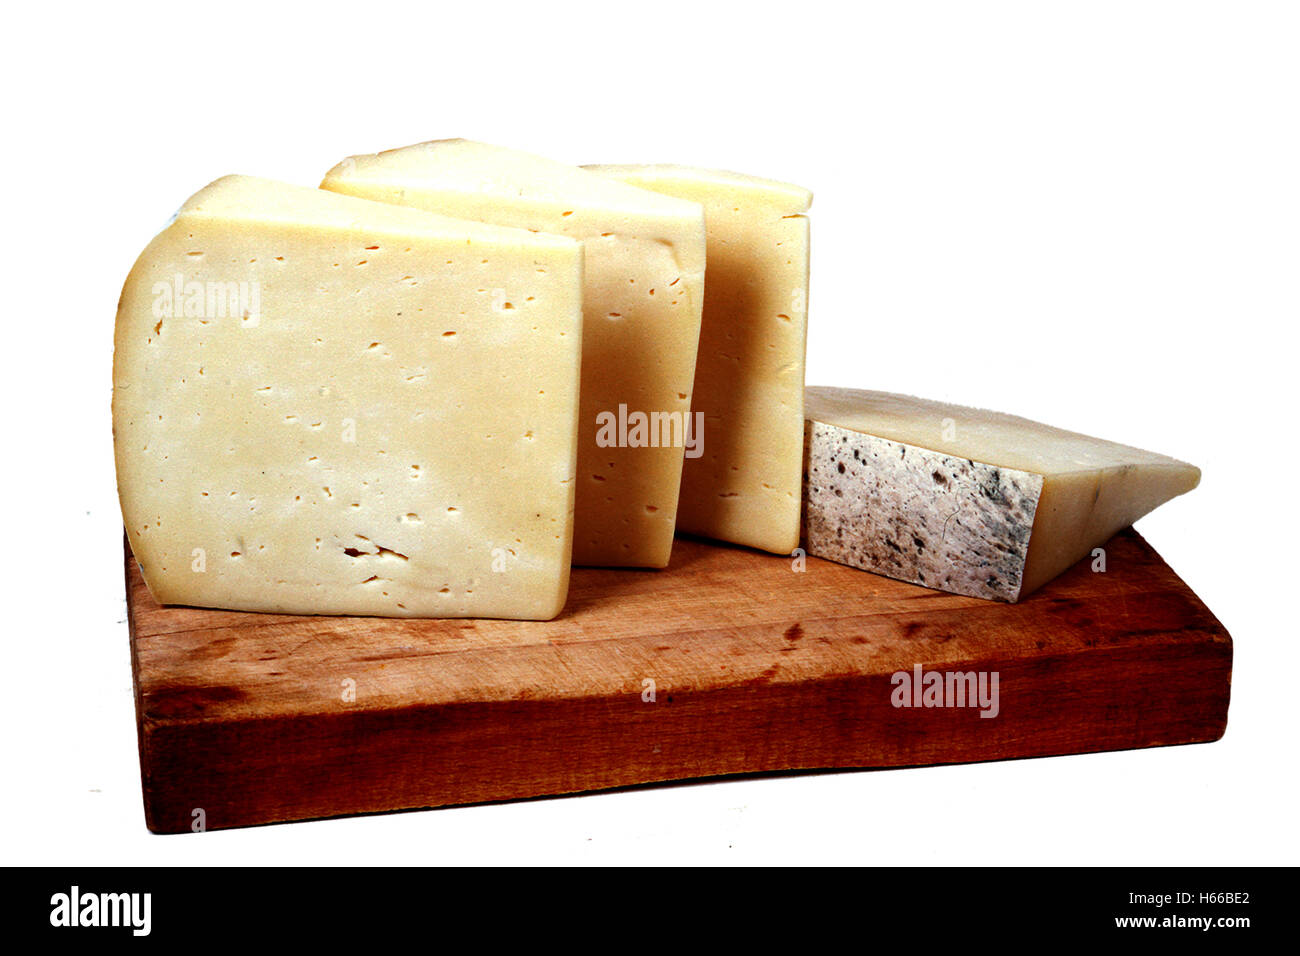 Mature Cheddar Cheese Stock Photo